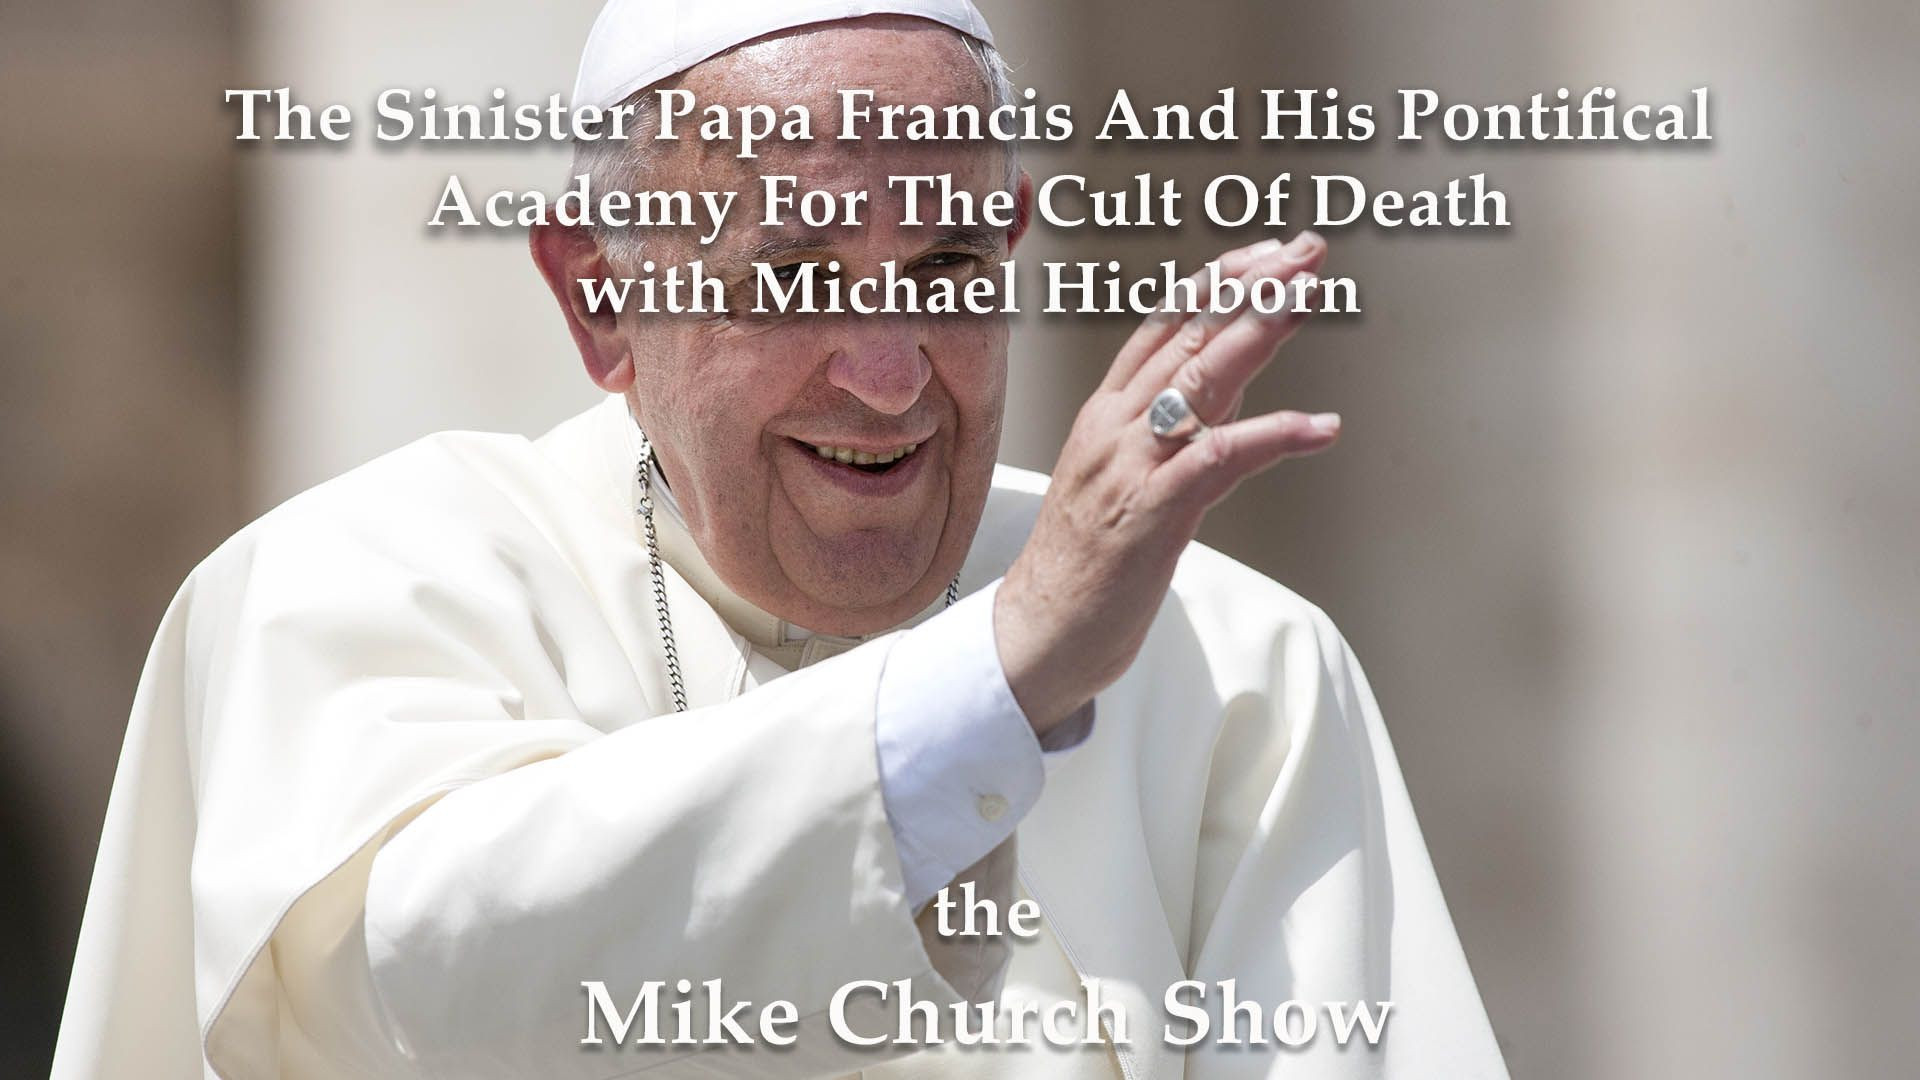 ⁣The Sinister Papa Francis And His Pontifical Academy For The Cult Of Death with Michael Hichborn